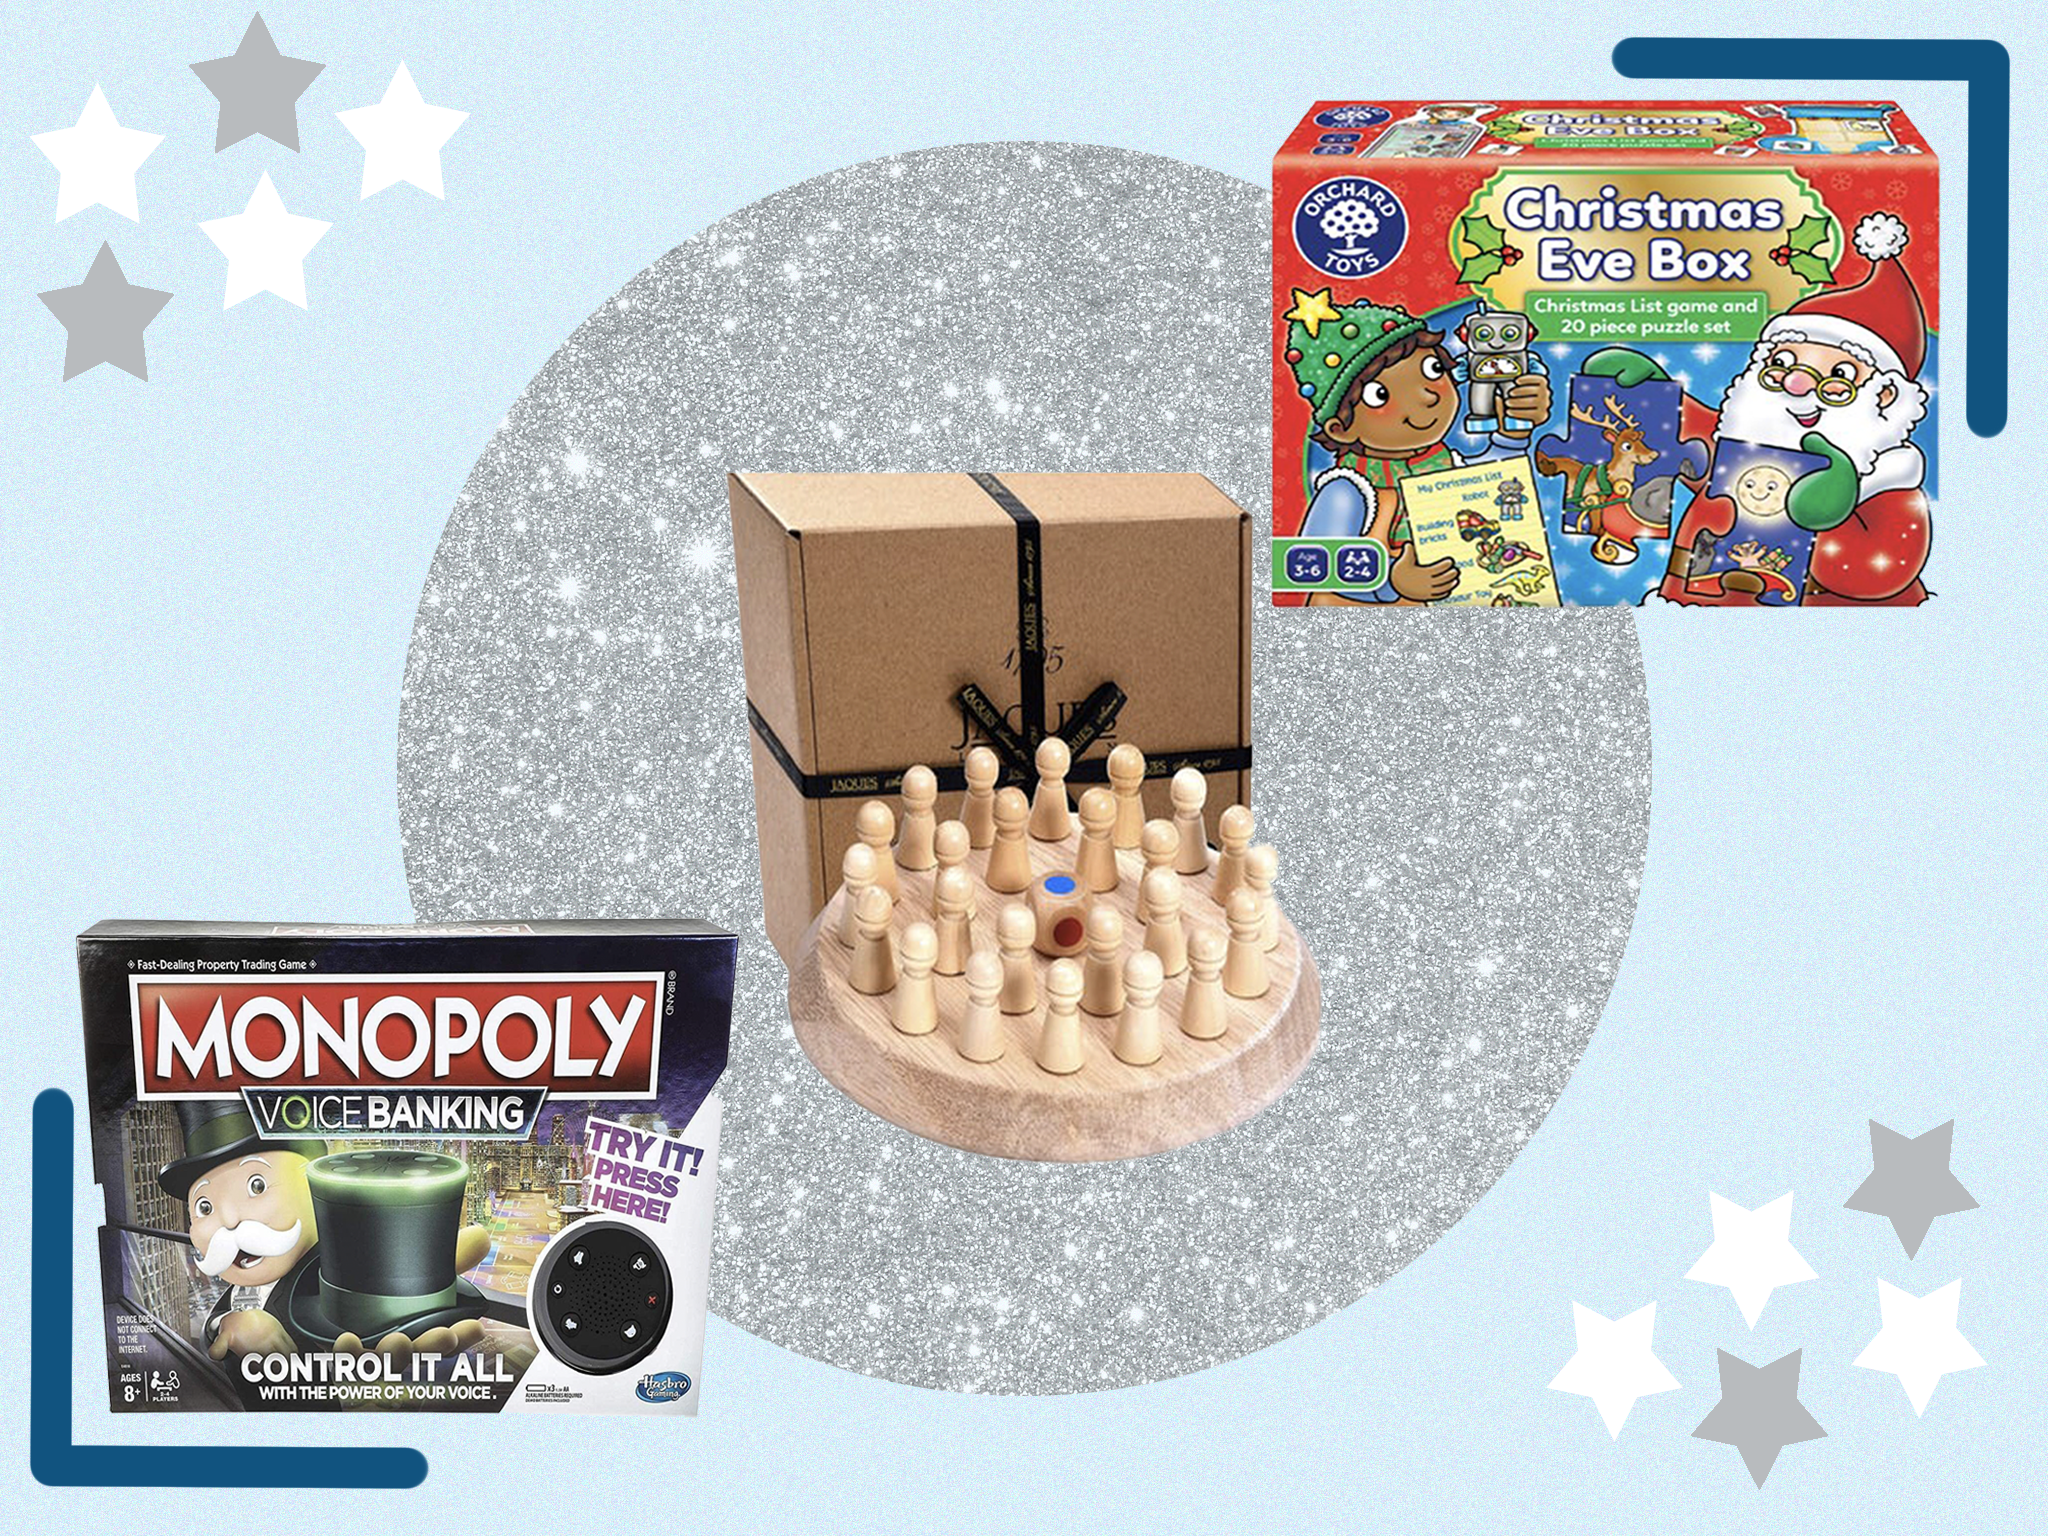 Family puzzles, games and toys to while away the festive season